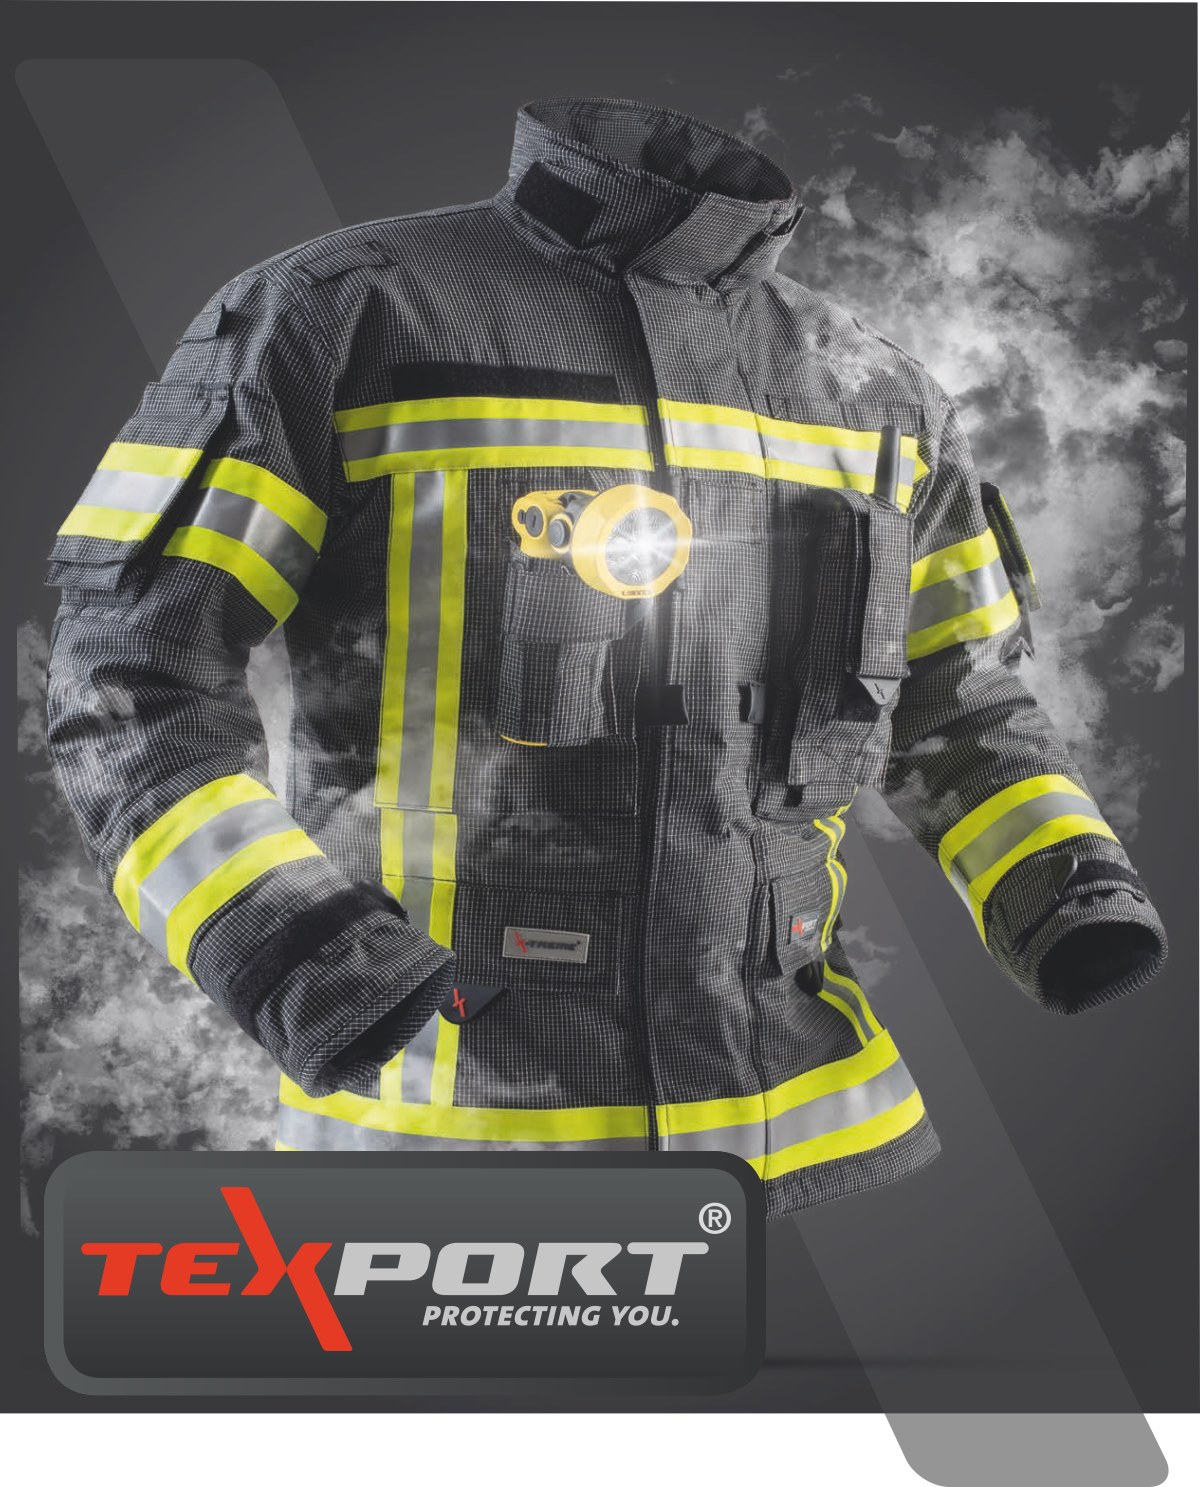 You are currently viewing Texport Firewear